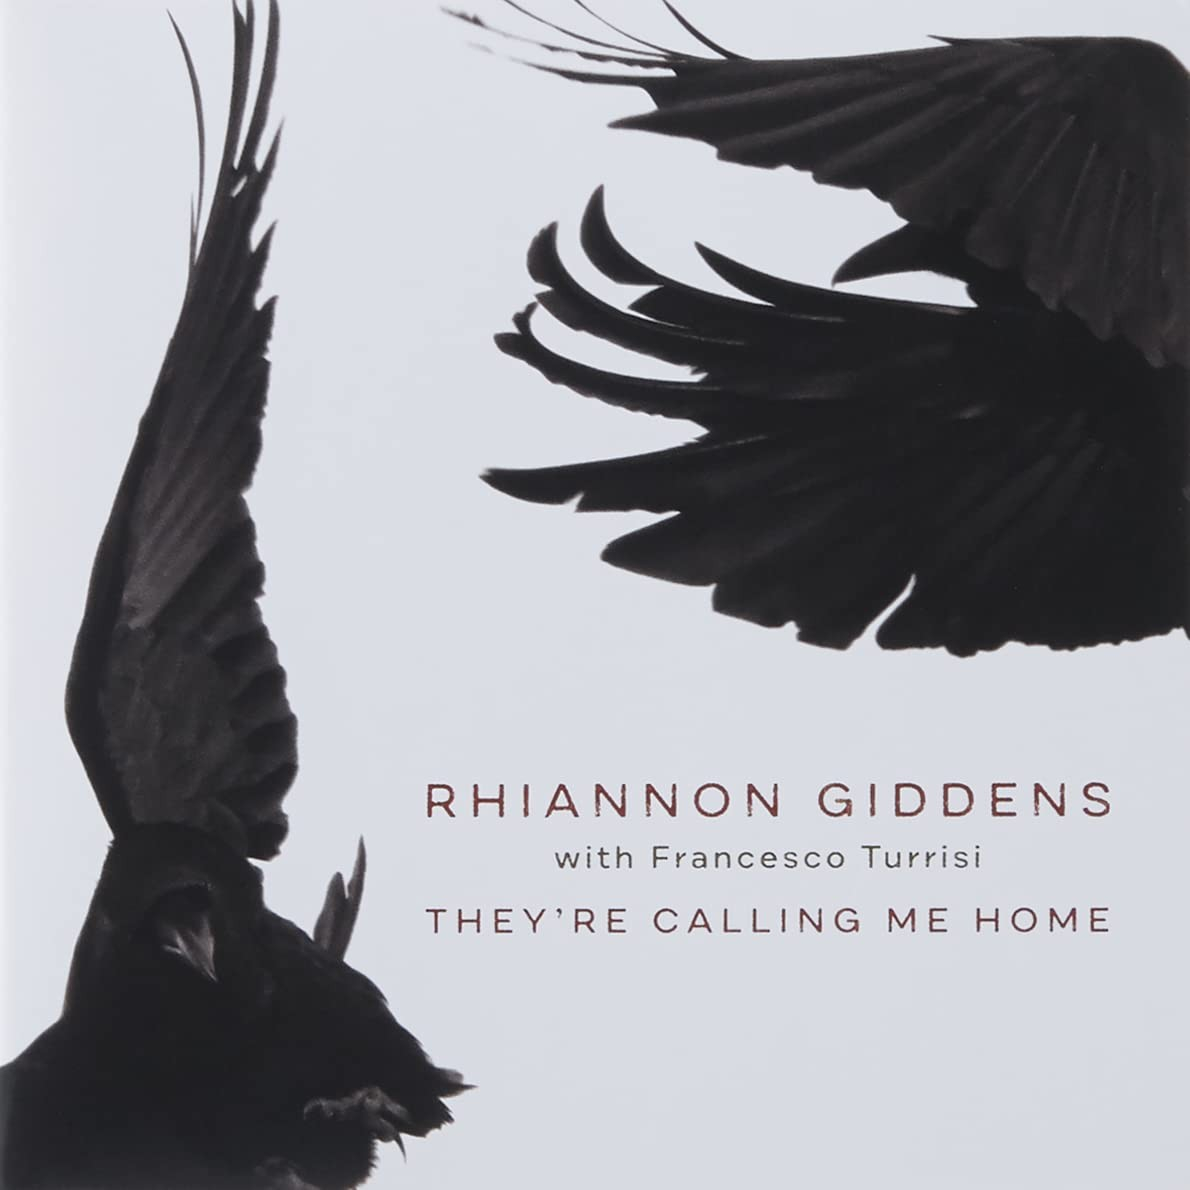 GIDDENS, RHIANNON - THEY'RE CALLING ME HOME, Vinyl